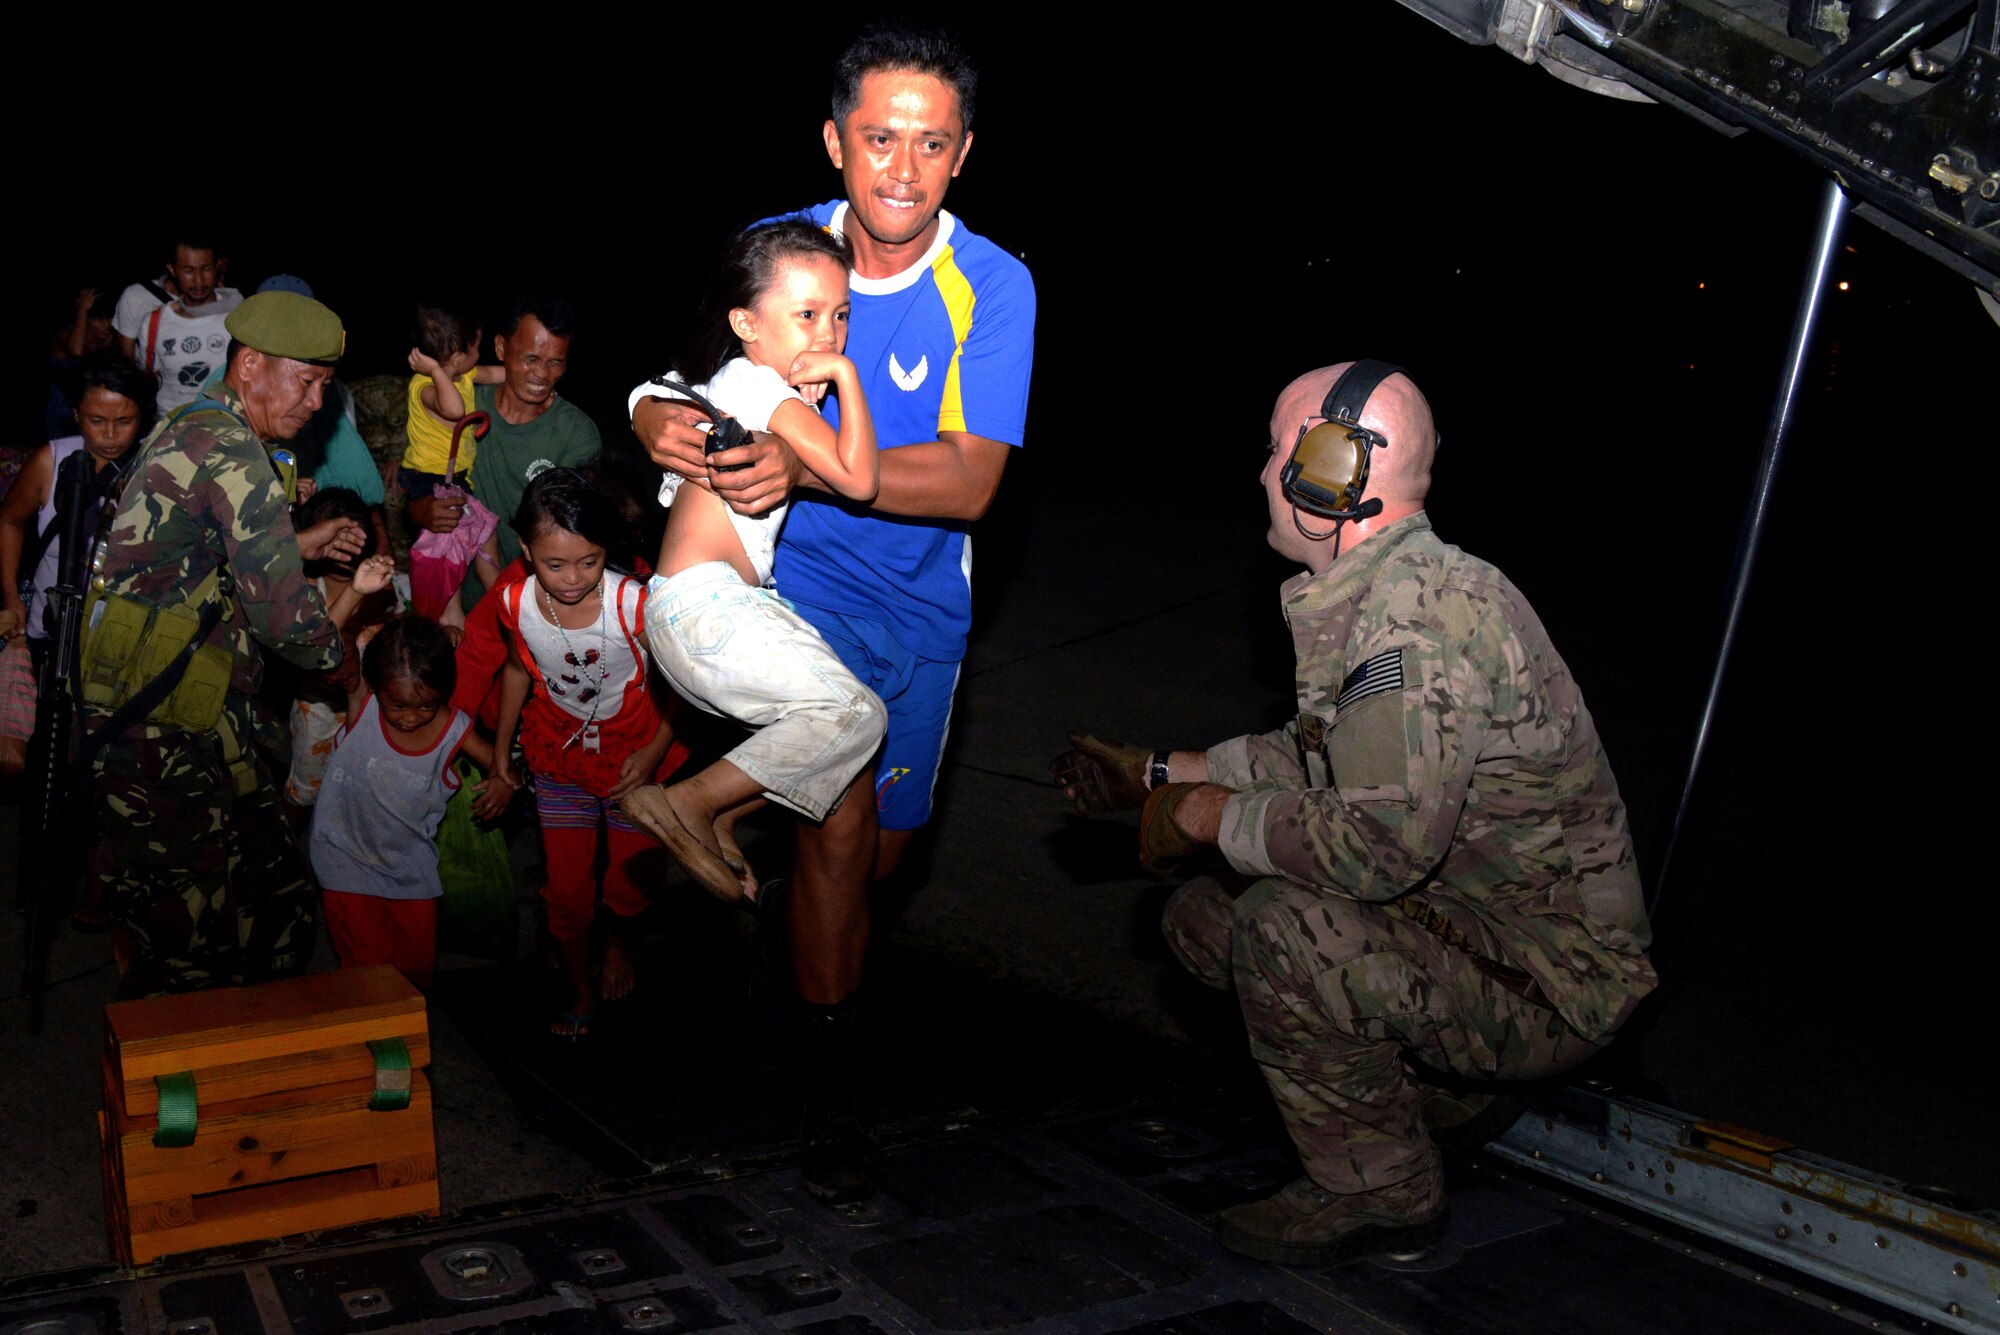 Airman 1st Class Andrew Wiseman works with members of the Armed Forces of the Philippines to assist displaced people boarding an MC-130P Combat Shadow Nov. 14, 2013, at Tacloban Airport, Philippines. Members of Air Force Special Operations Command are deployed alongside U.S. Marine Corps Forces Pacific and the Armed Forces of the Philippines in support of Operation Damayan to provide humanitarian assistance in the aftermath of Typhoon Haiyan. Wiseman is a loadmaster with the 17th Special Operations Squadron. (U.S. Air Force photo/Tech. Sgt. Kristine Dreyer)





 




